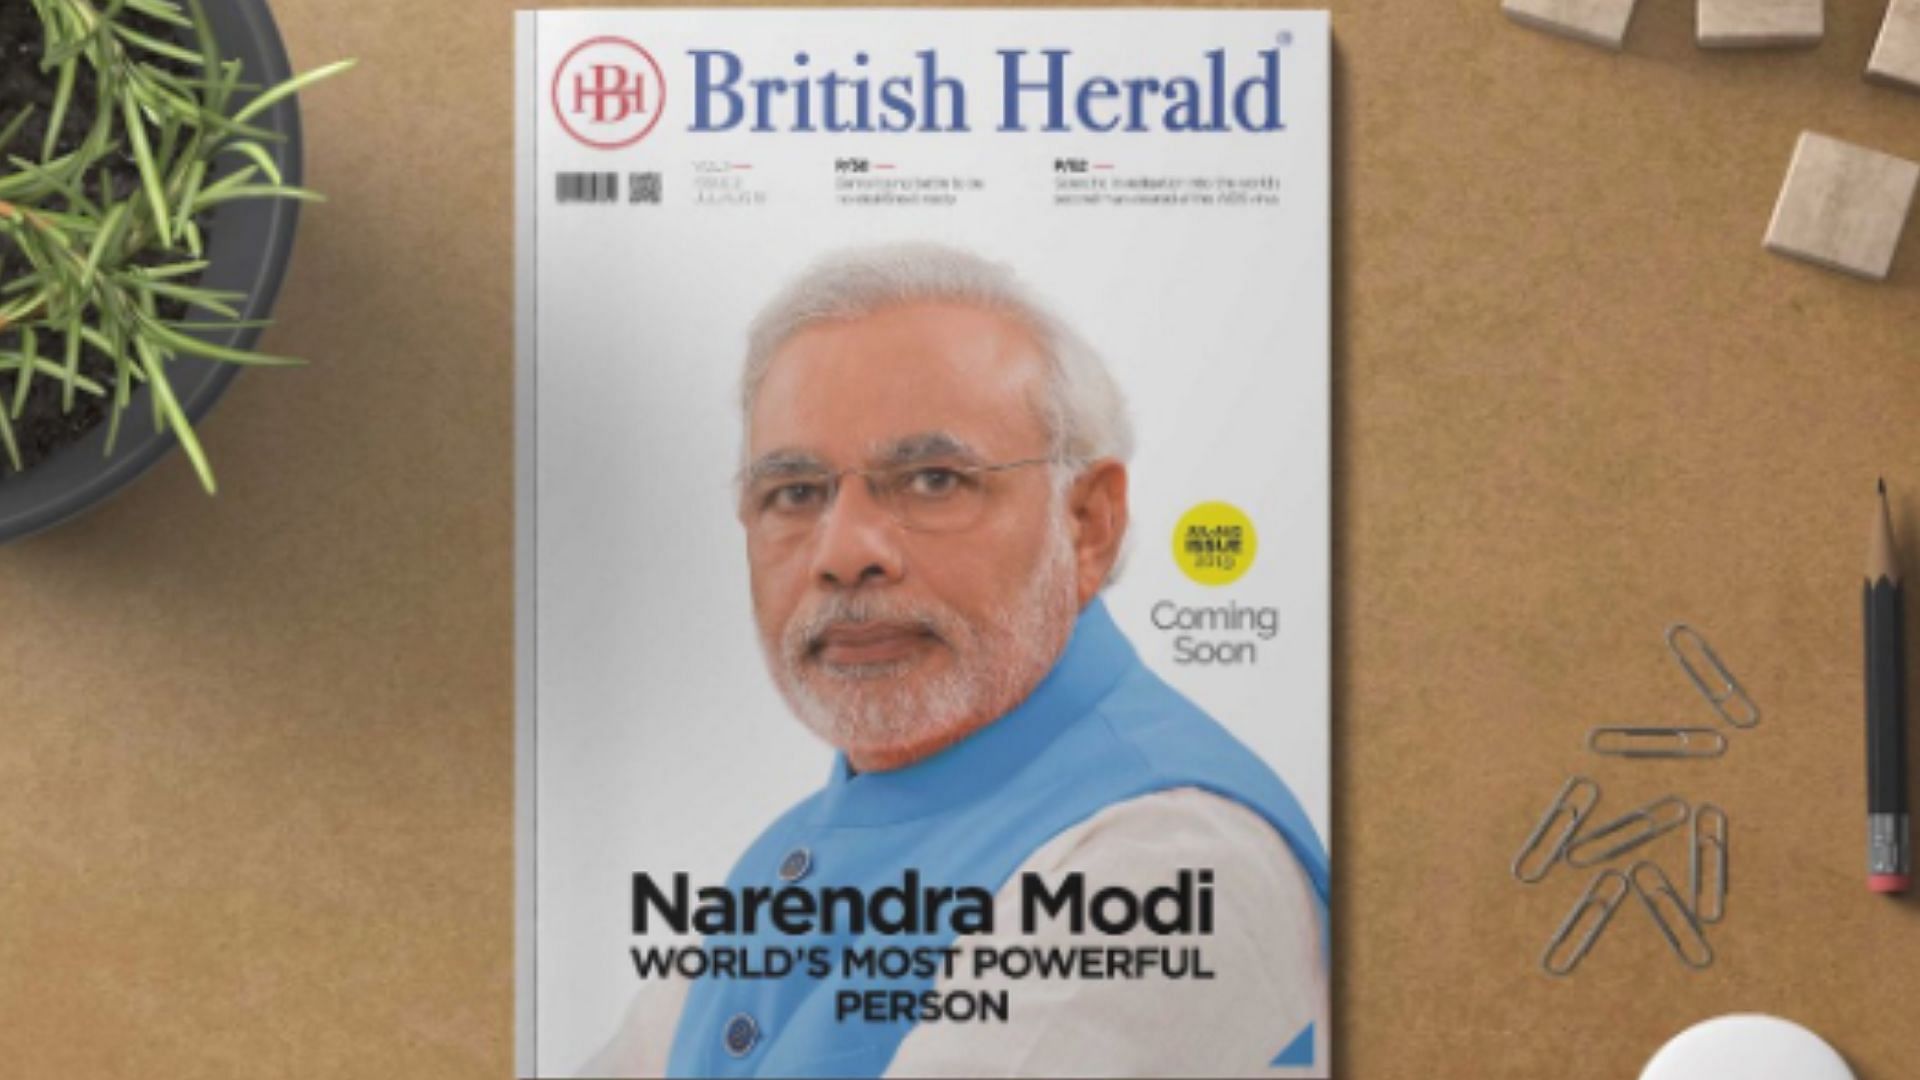 A UK-based magazine has declared Prime Minister Narendra Modi as the world’s most powerful person.